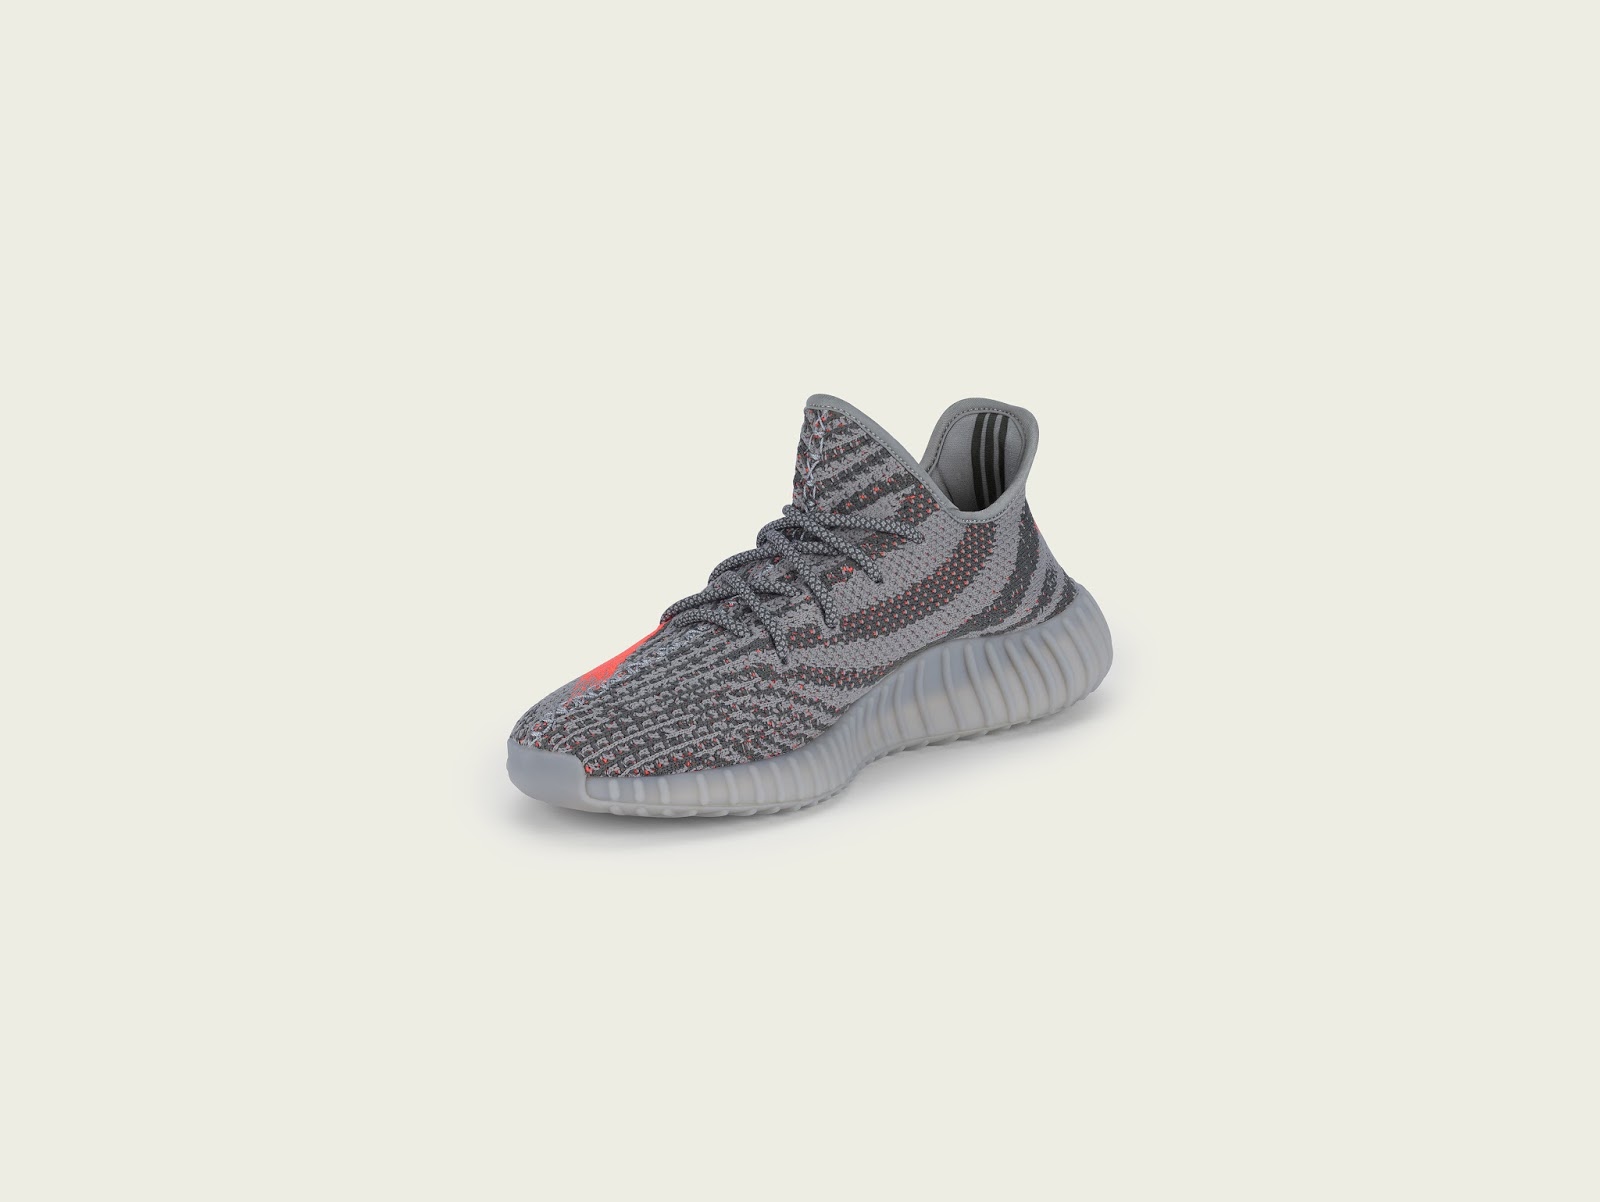 adidas yeezy boost 350 south africa price